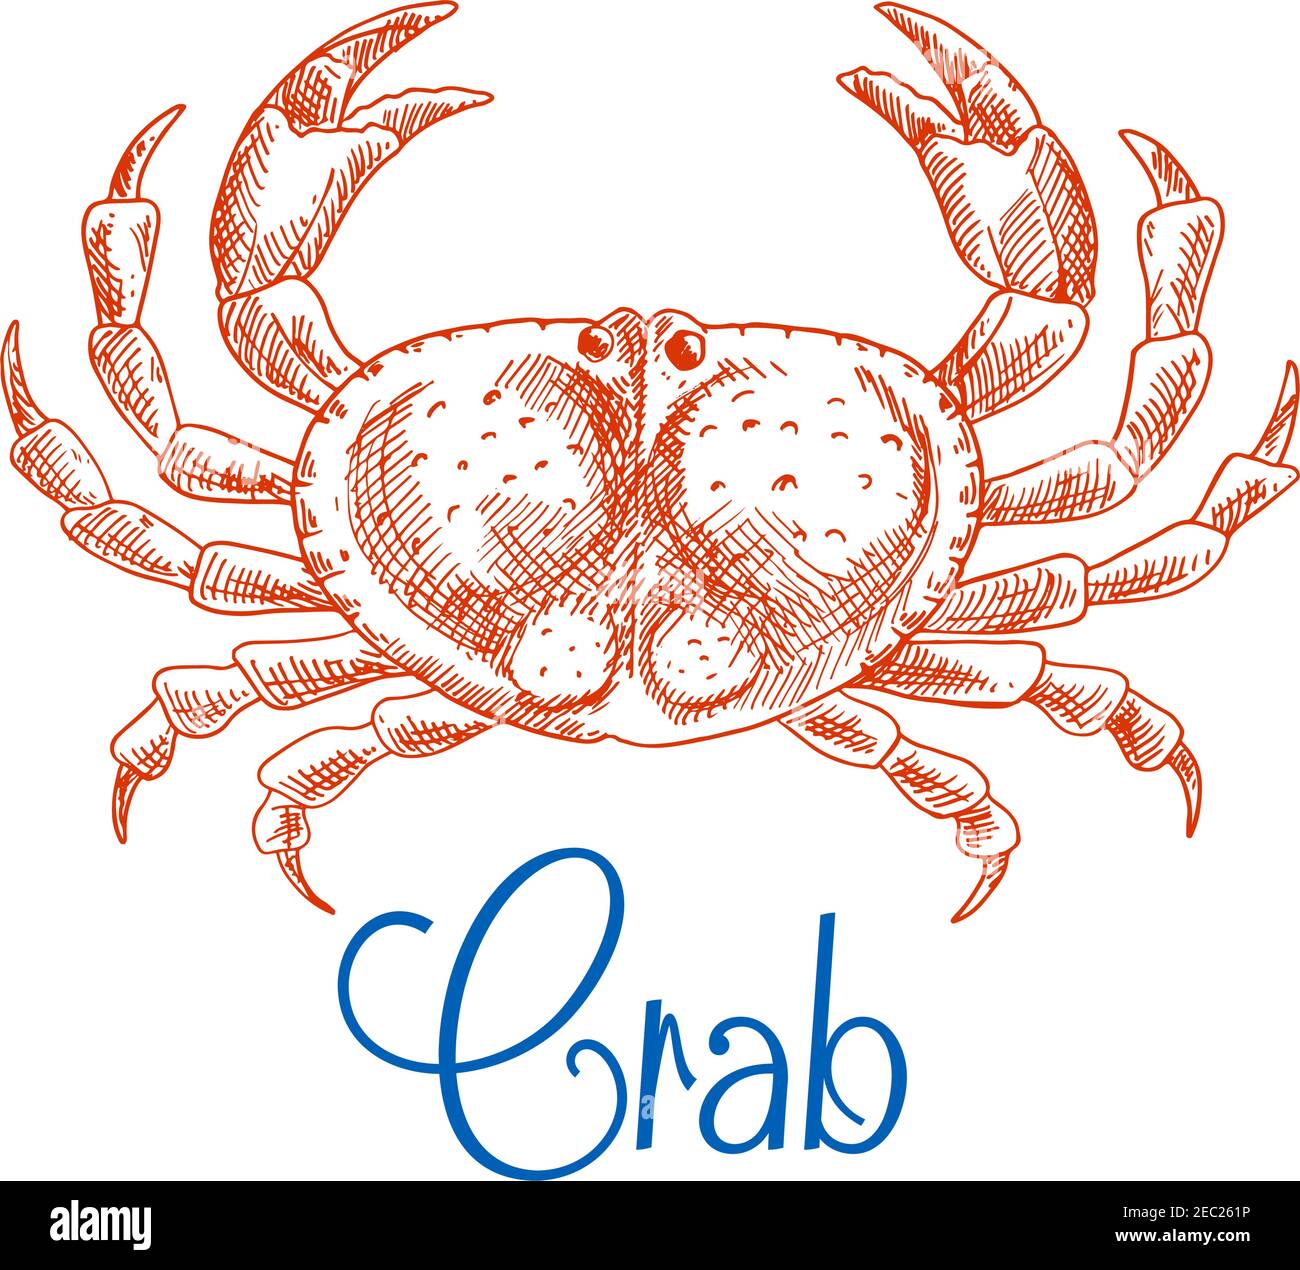 Large red ocean crab isolated sketch icon with raised pincers and text Crab below. Seafood menu, zoo aquarium mascot, t-shirt print design usage Stock Vector